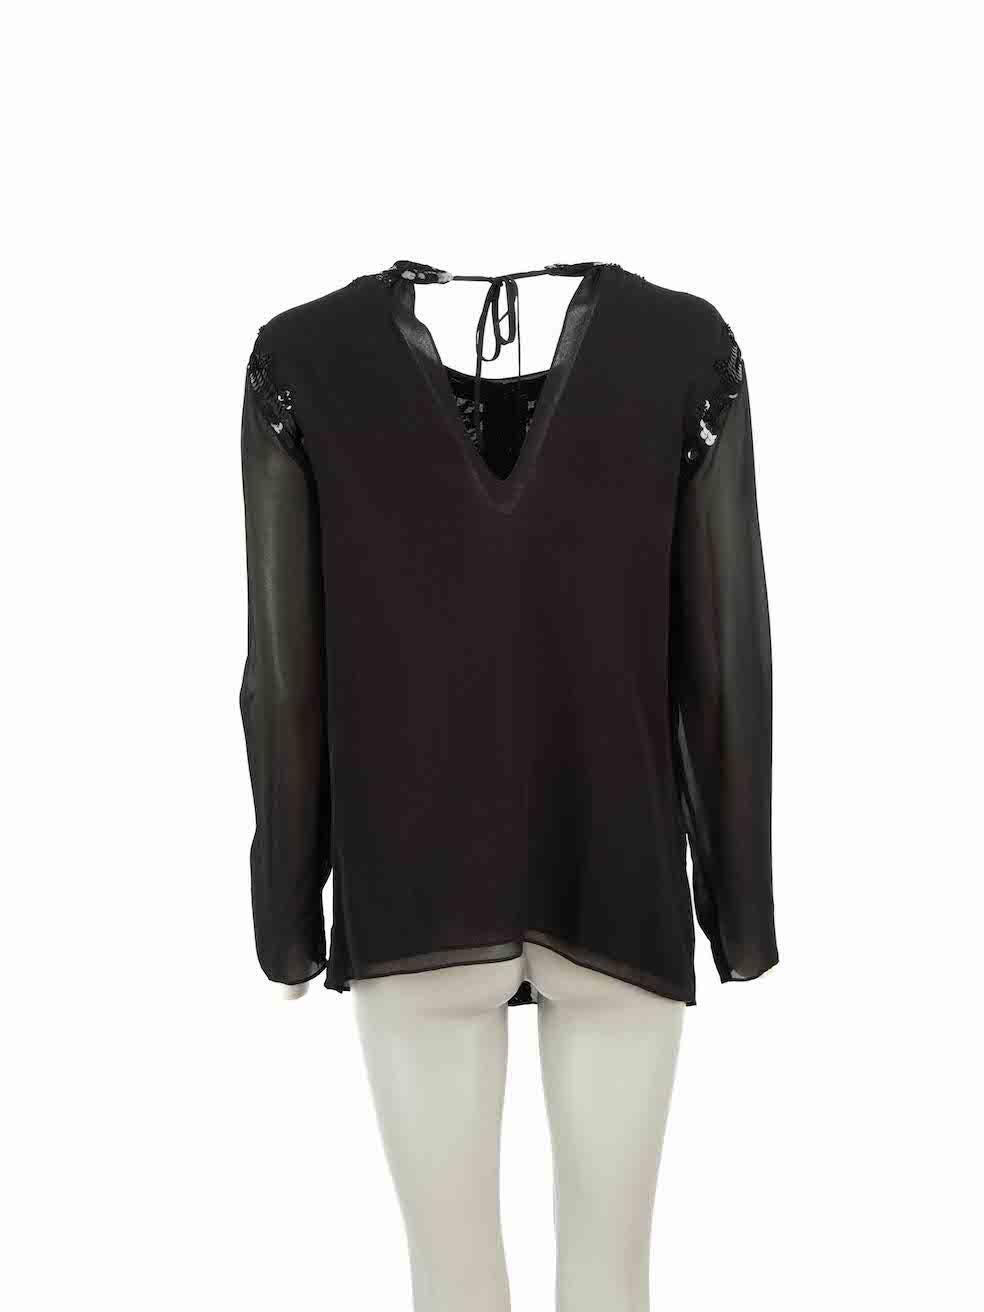 Altuzarra Black Silk Sequin Embellished Top Size M In Good Condition For Sale In London, GB